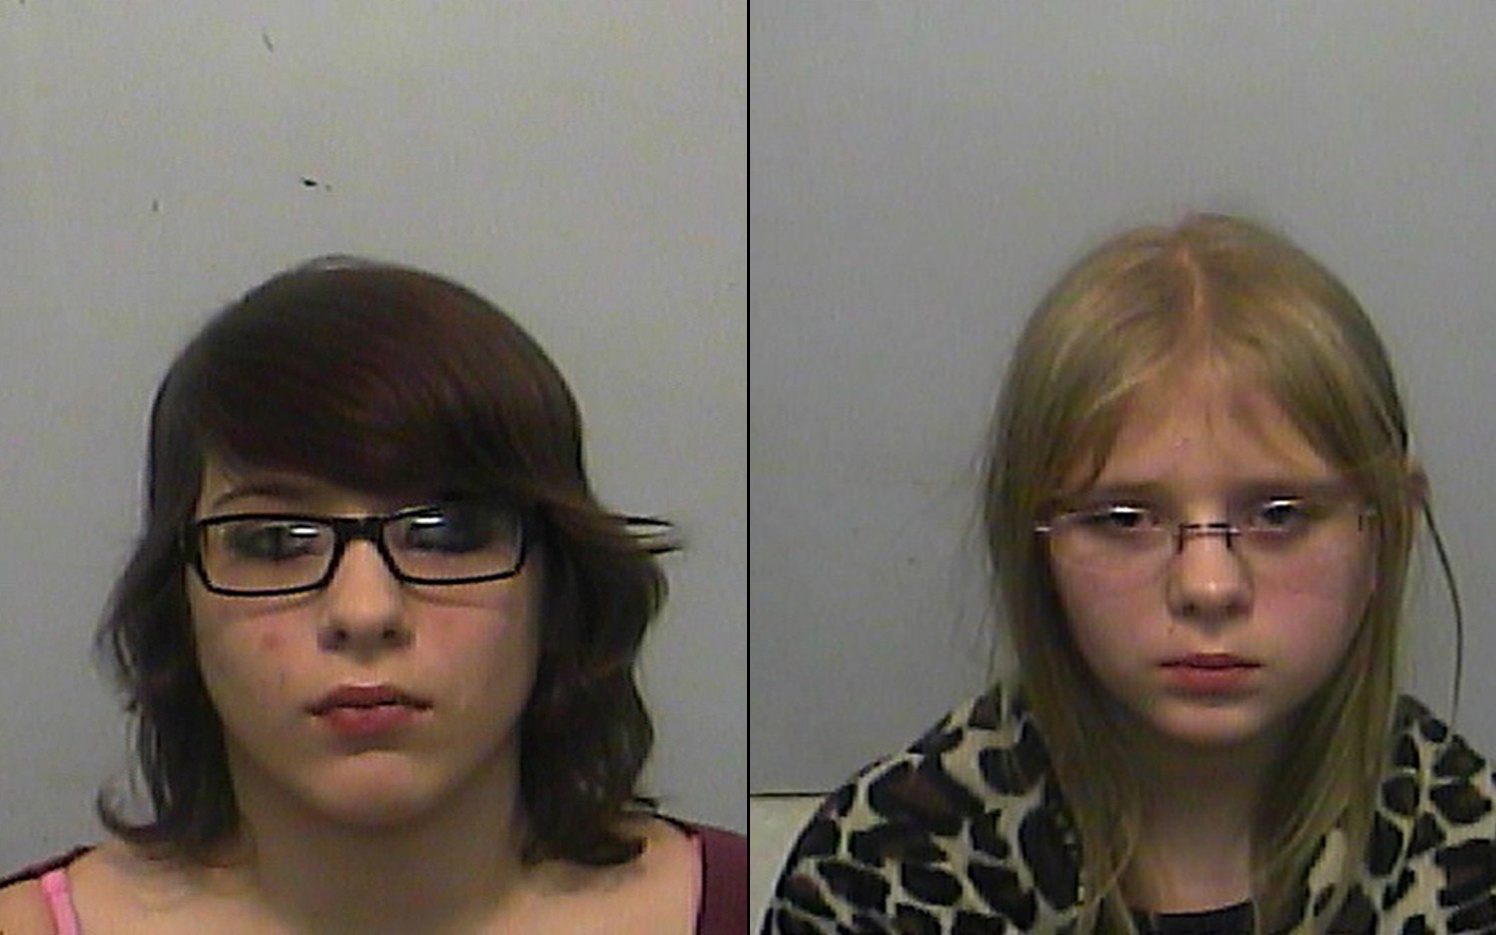 US sisters, aged 15 and 11, charged with murder of their 16-year-old brother